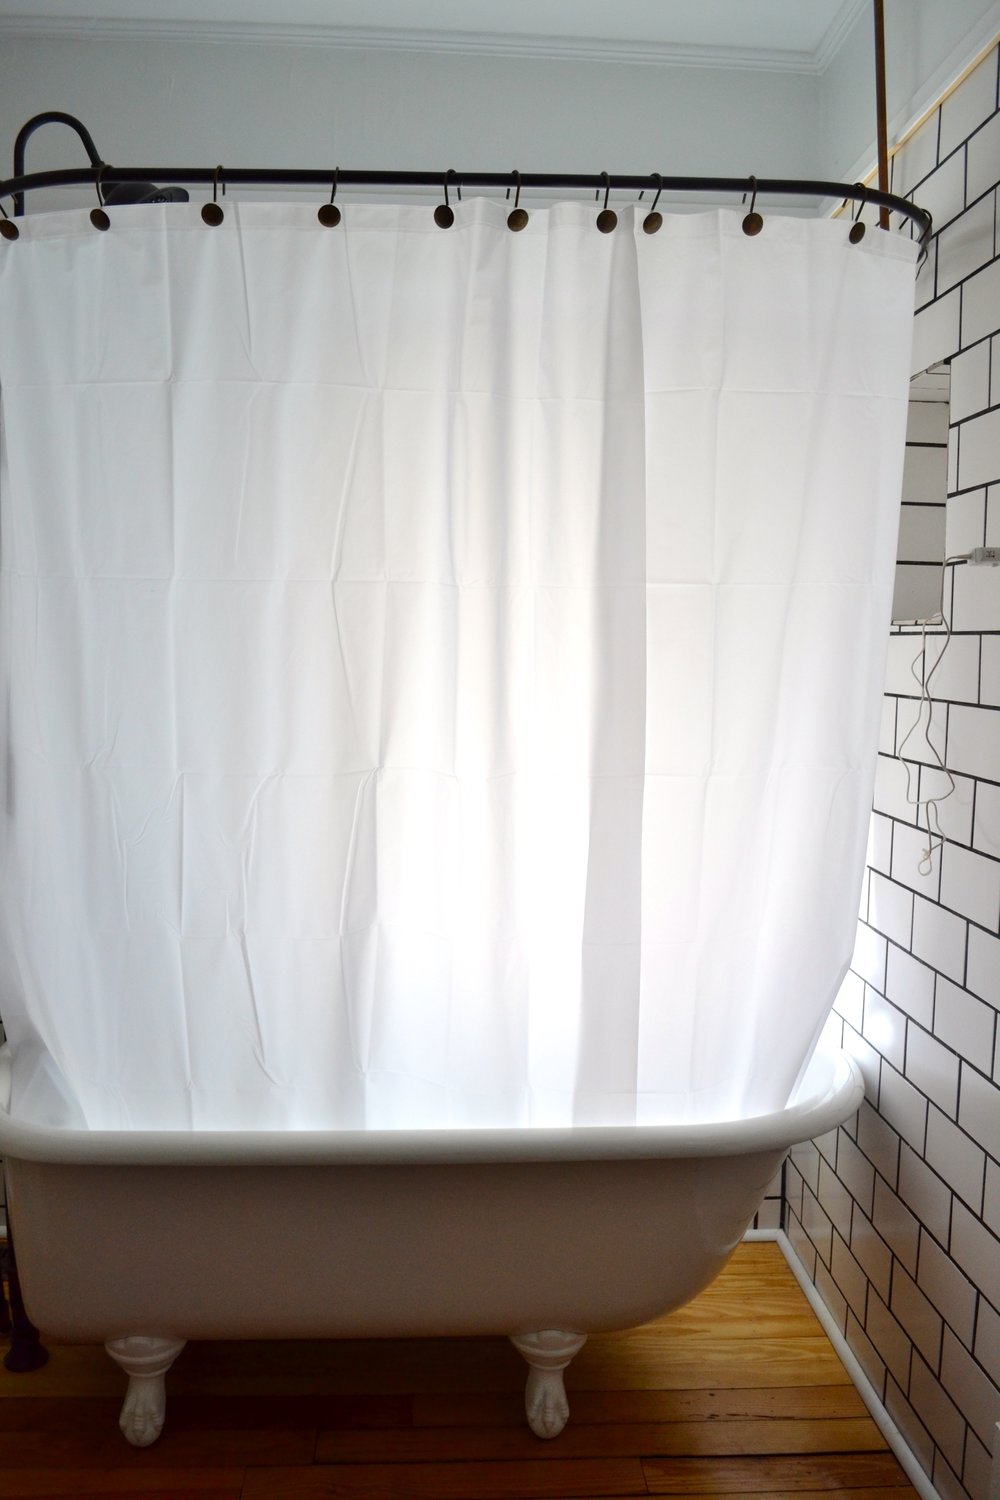 Clawfoot Tub Shower Curtain Liner, How To Put A Shower Curtain On Clawfoot Tub